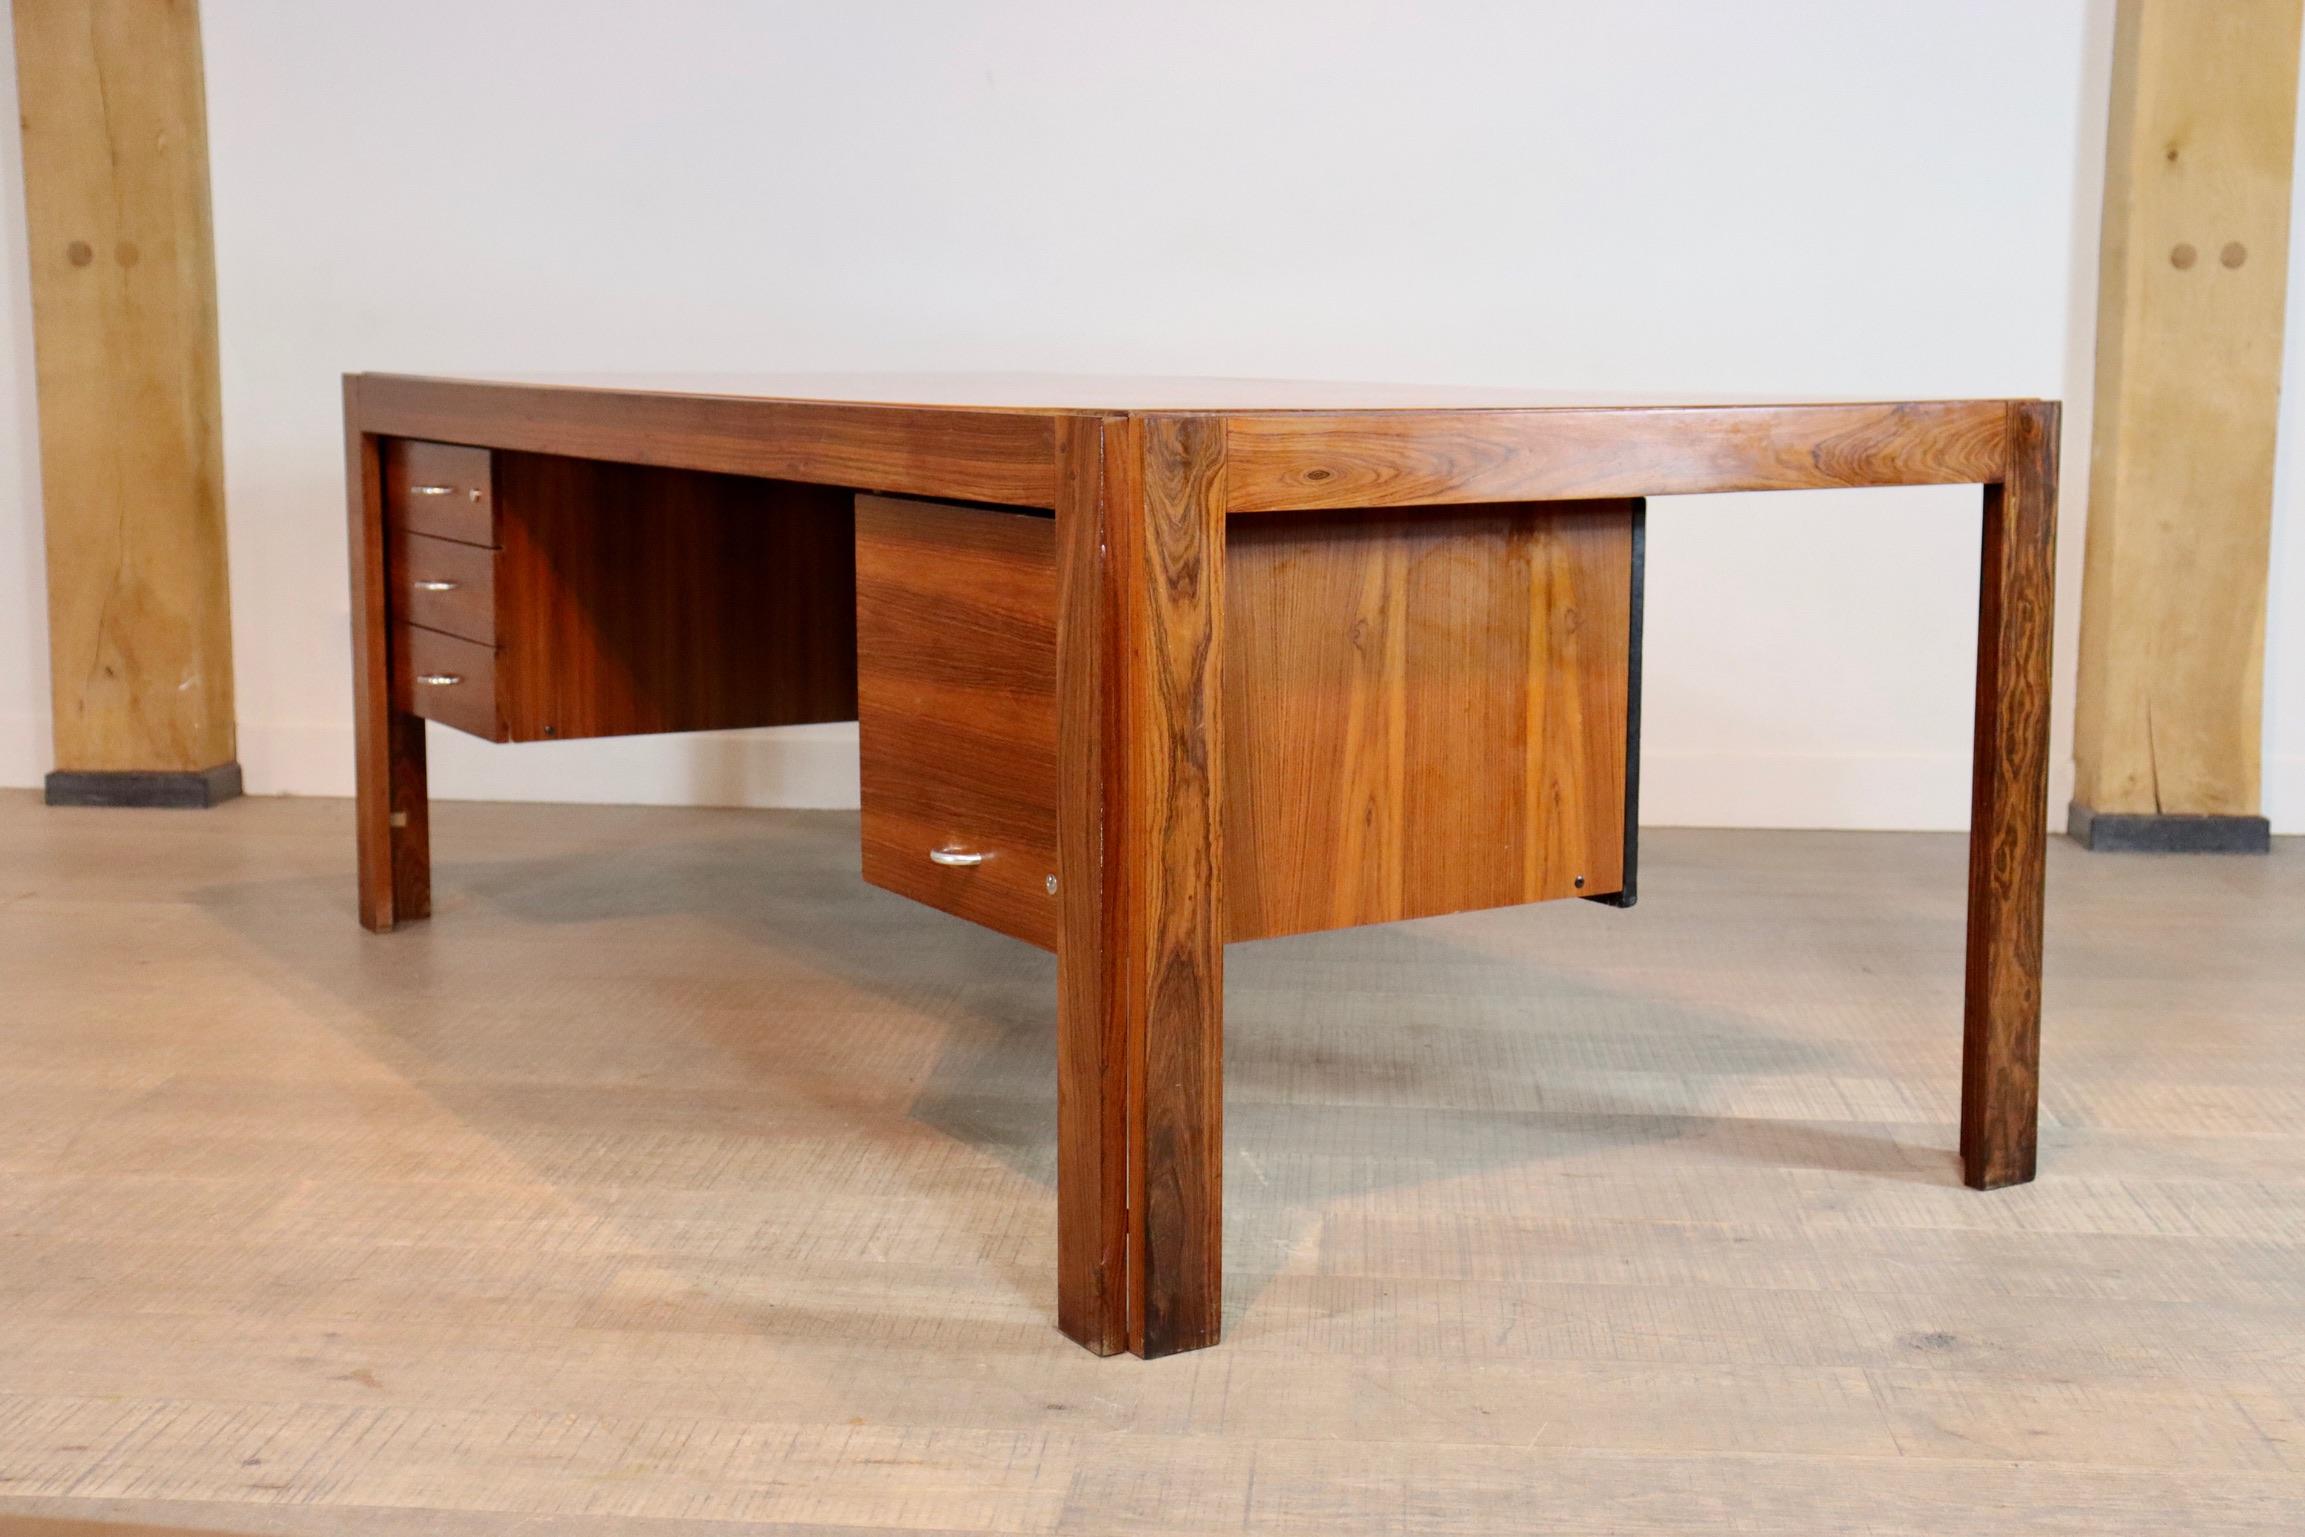 Very rare Brazilian solid Rosewood Escriba directors desk designed by Tora Brazil in the 1970s. The Rosewood drawers have a leather panel at the back, allowing the desk to stand free in the space. Stunning directors desk that gives a luxurious